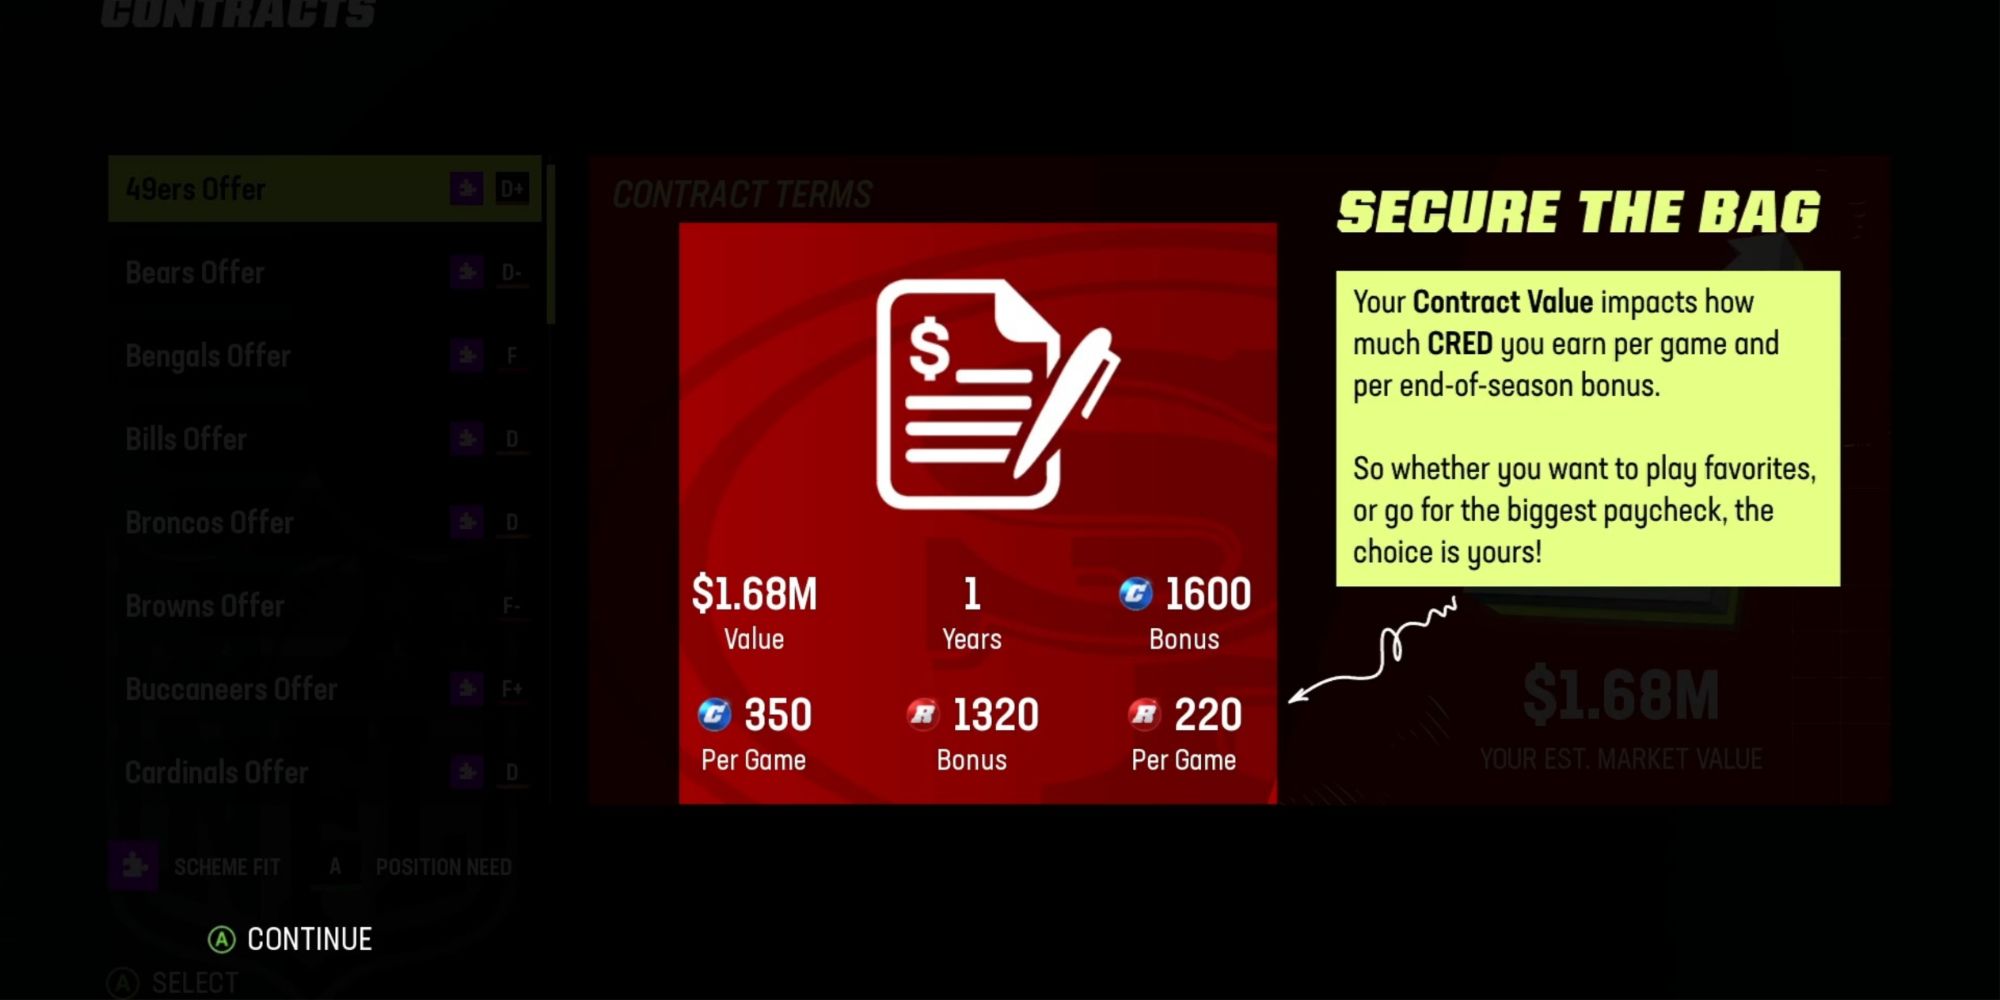 Madden NFL 23 Looking At Cred And Rep Contract Bonuses